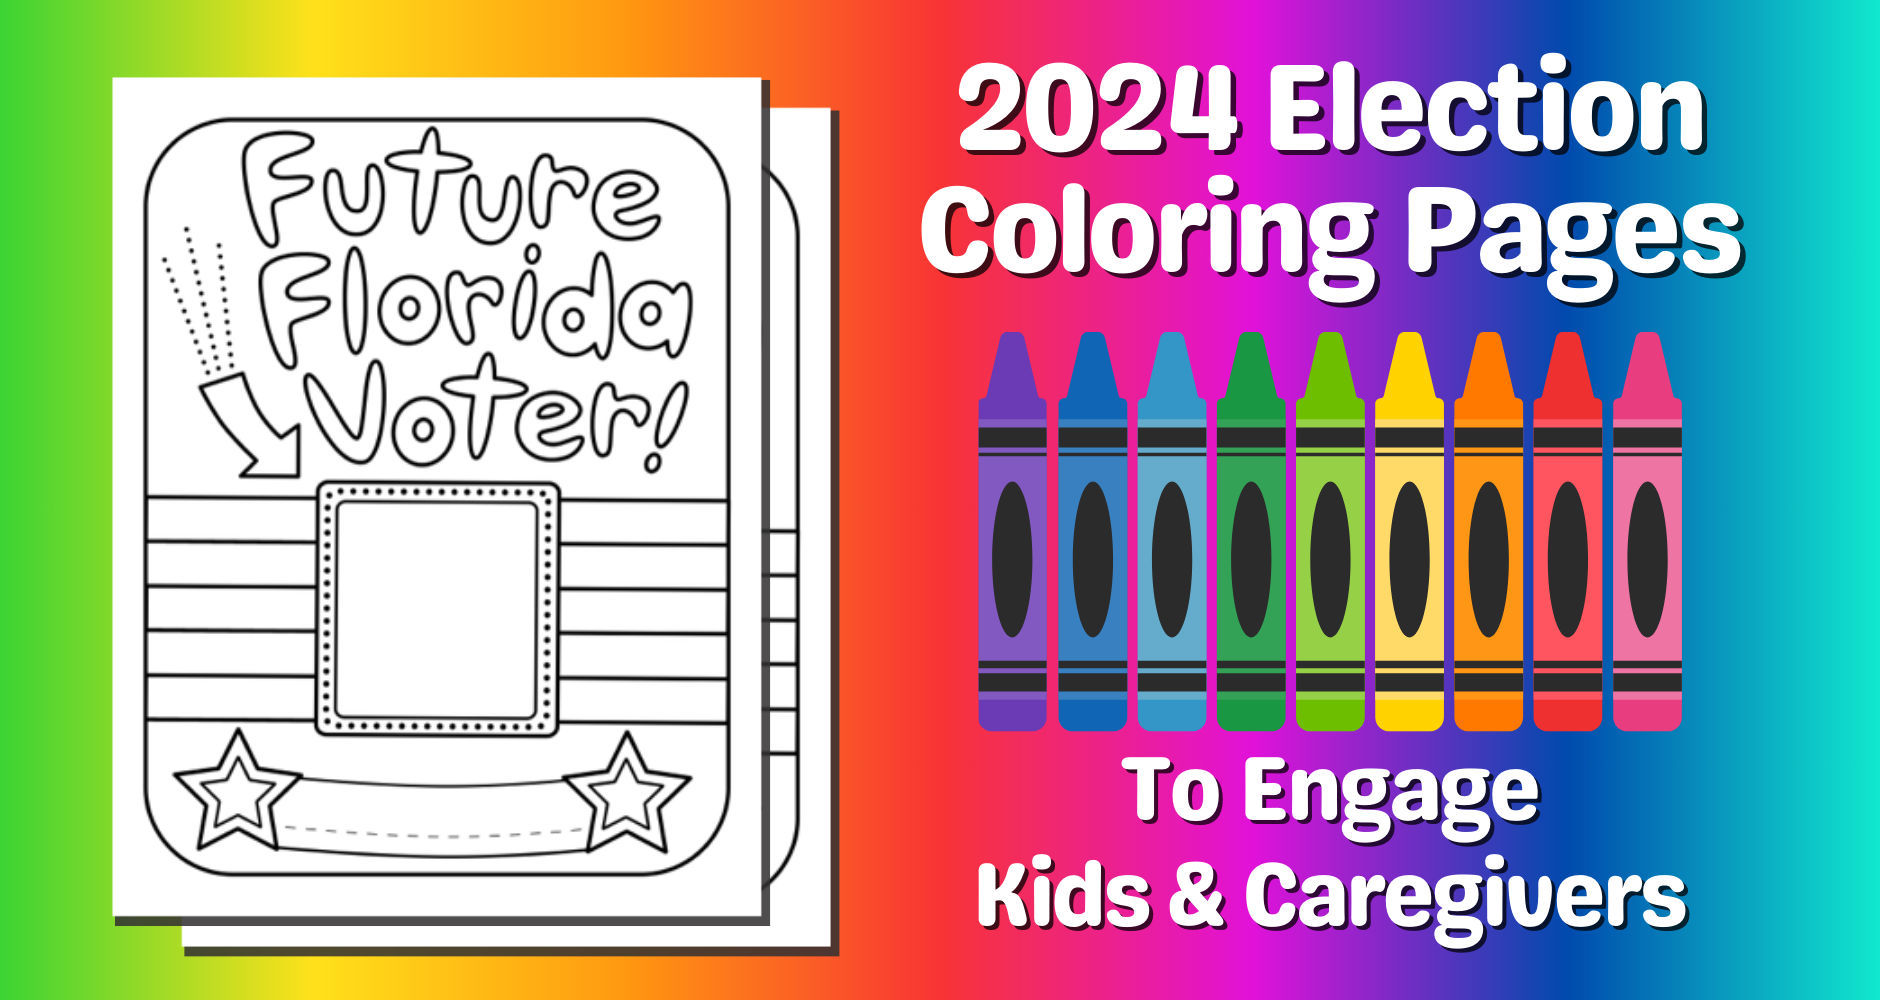 2024 Election Coloring Pages and Crayons on a rainbow background